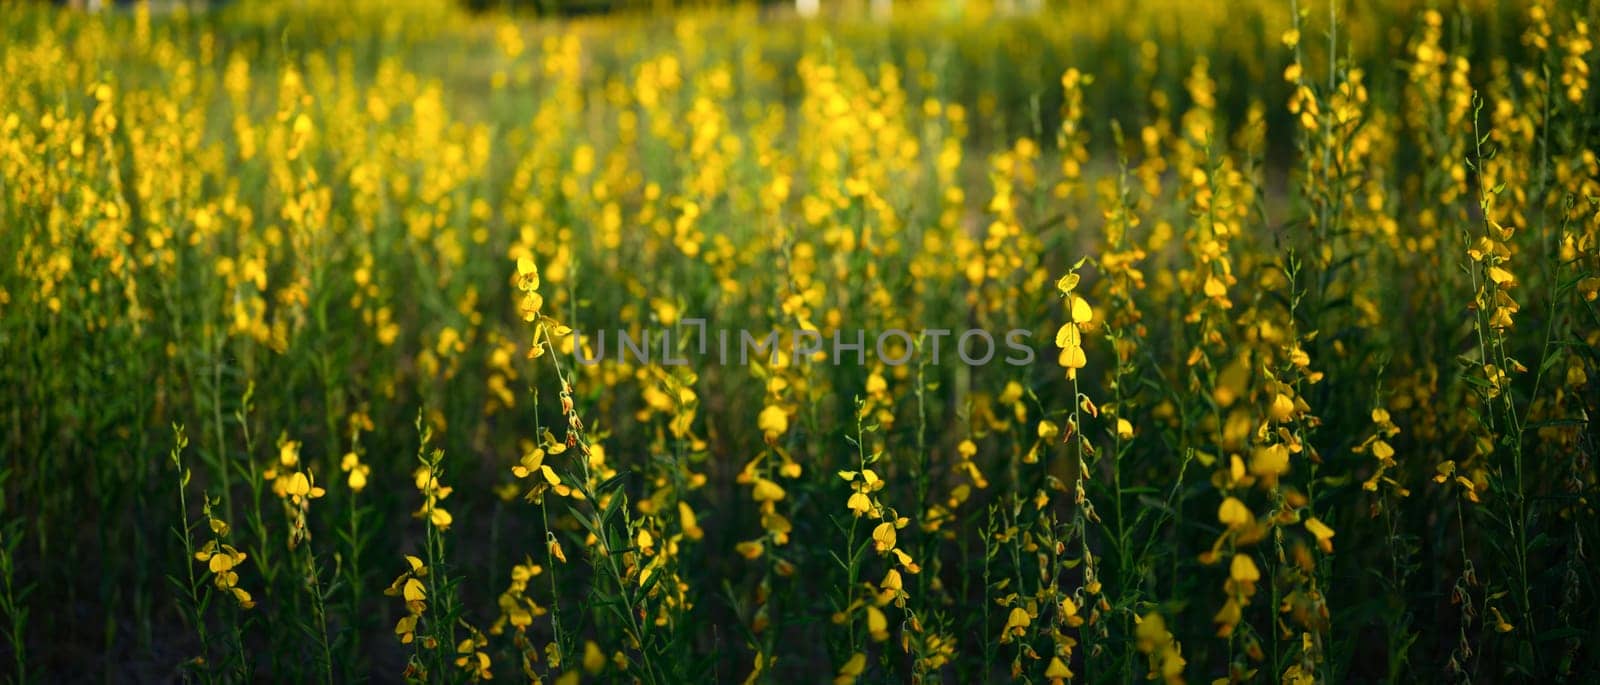 Yellow flowers of Crotalaria juncea or sunn hemp blooming in fields for soil improvement at sunset